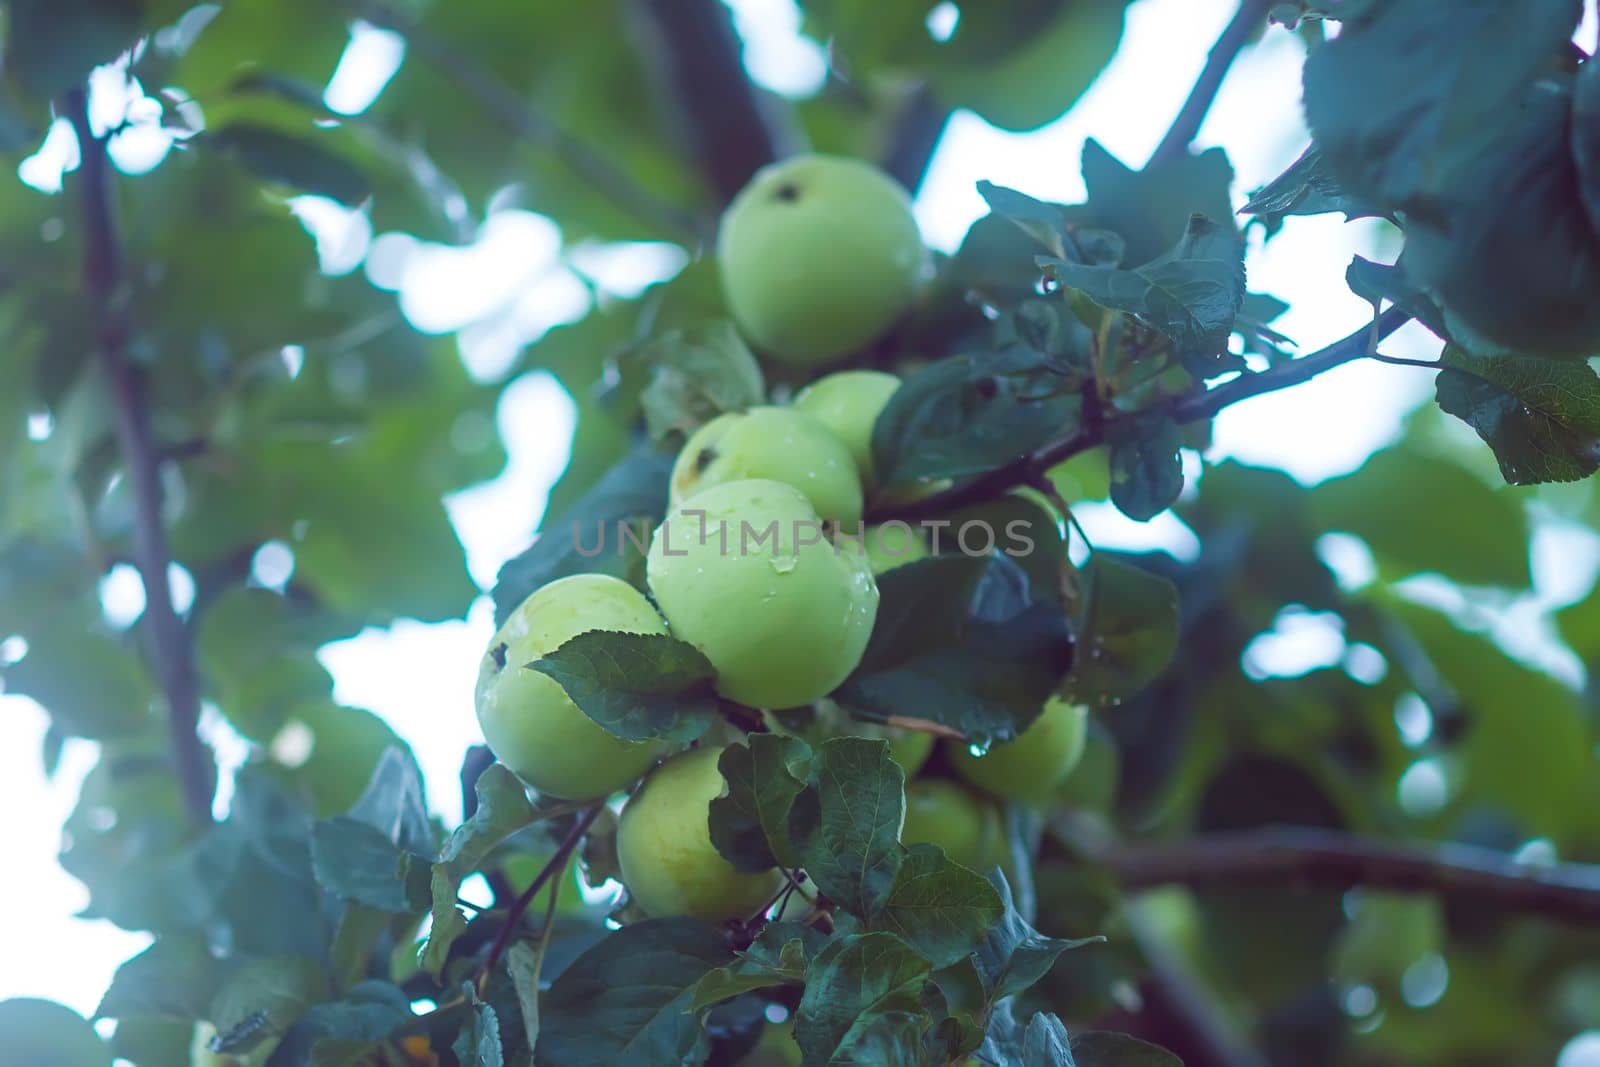 Green apples on a branch. Fruits ready to be harvested